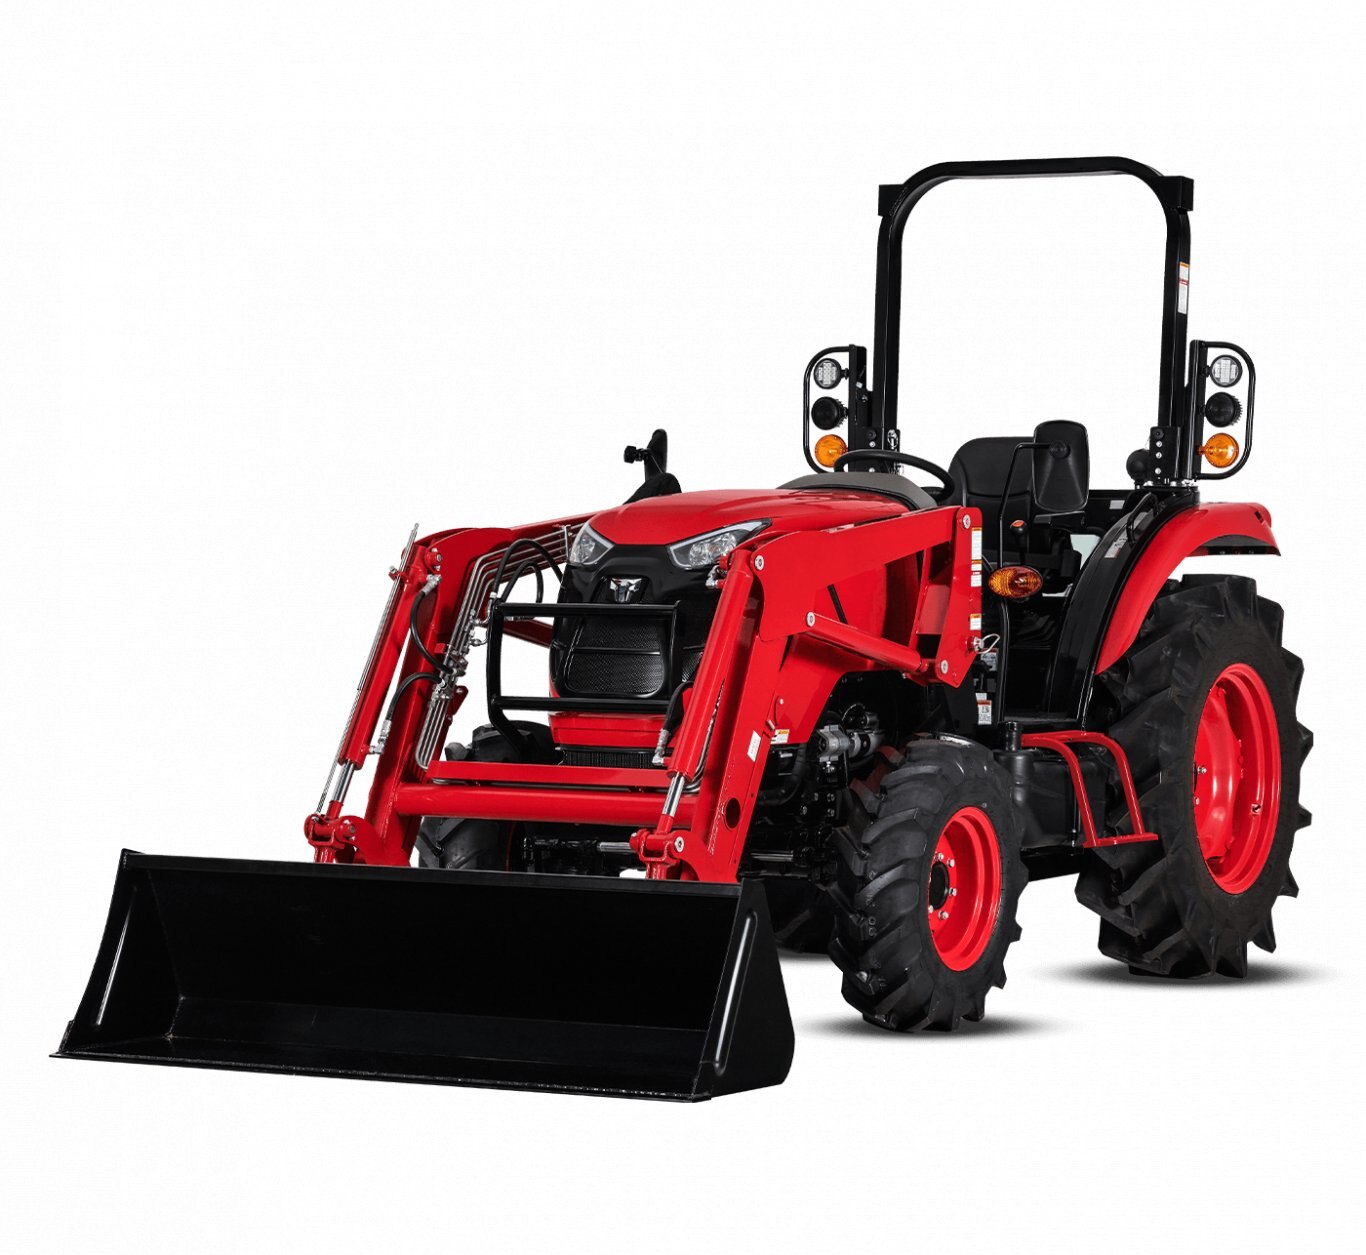 TYM Tractors Series 3 Compact T494